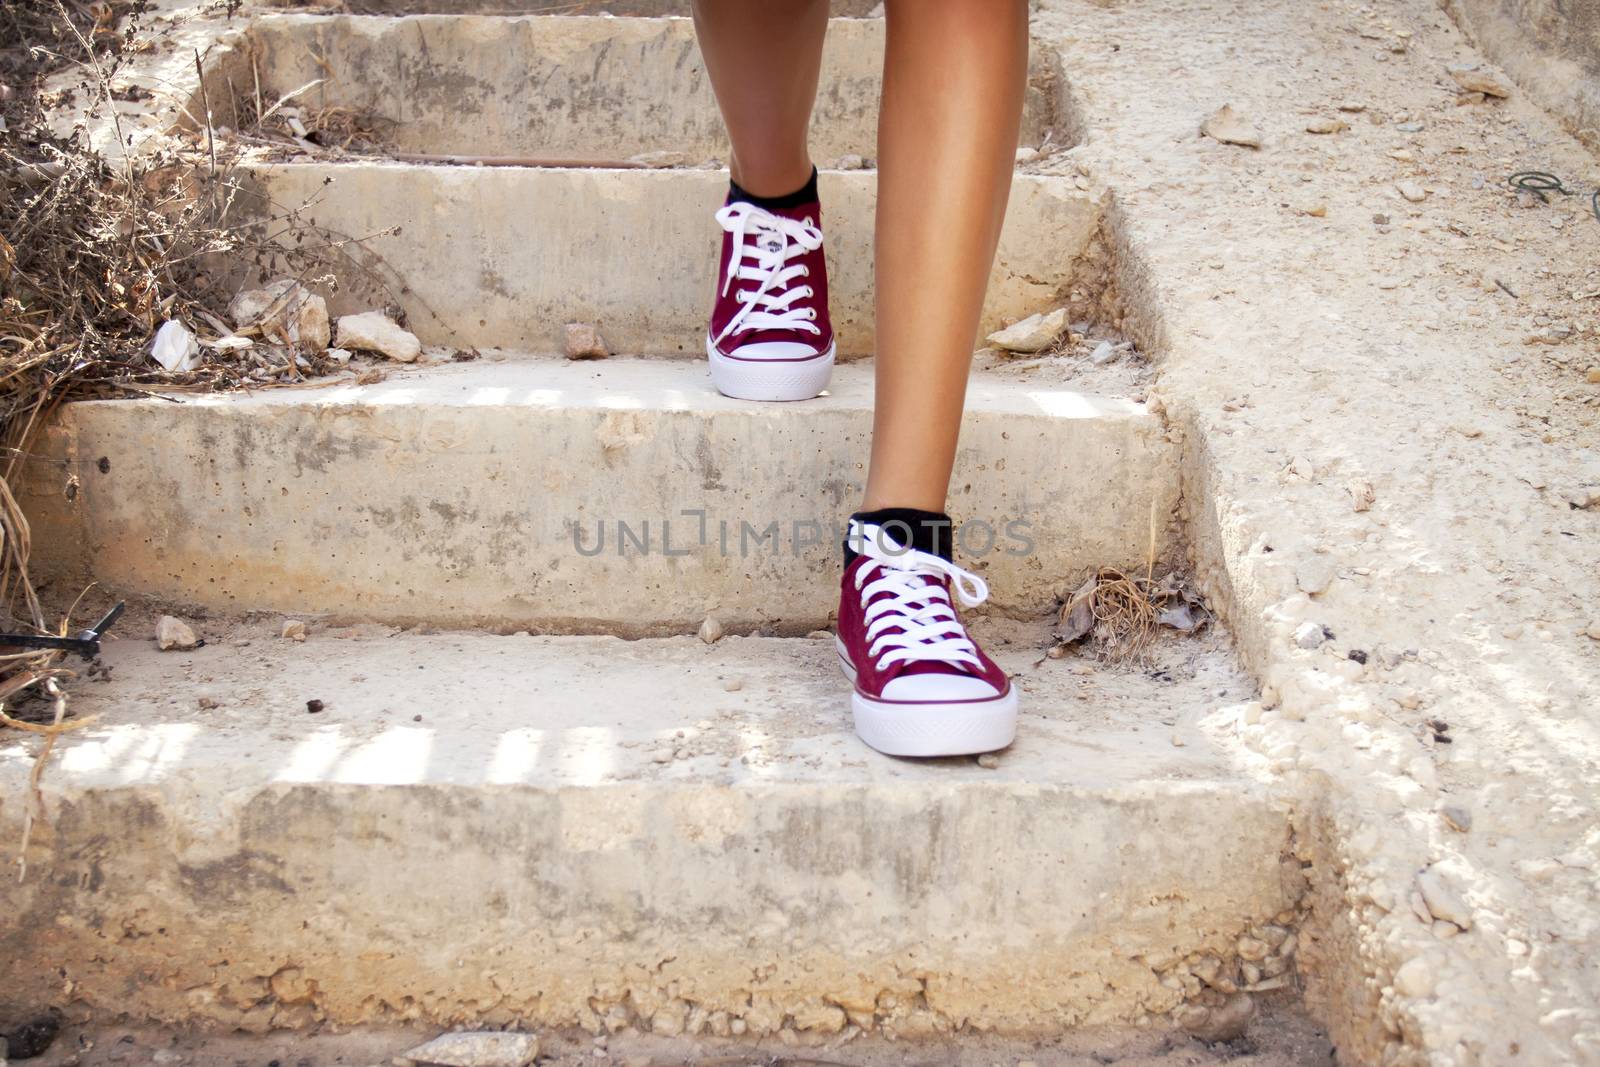 Barelegs with red sneakers walking in stairs by annems